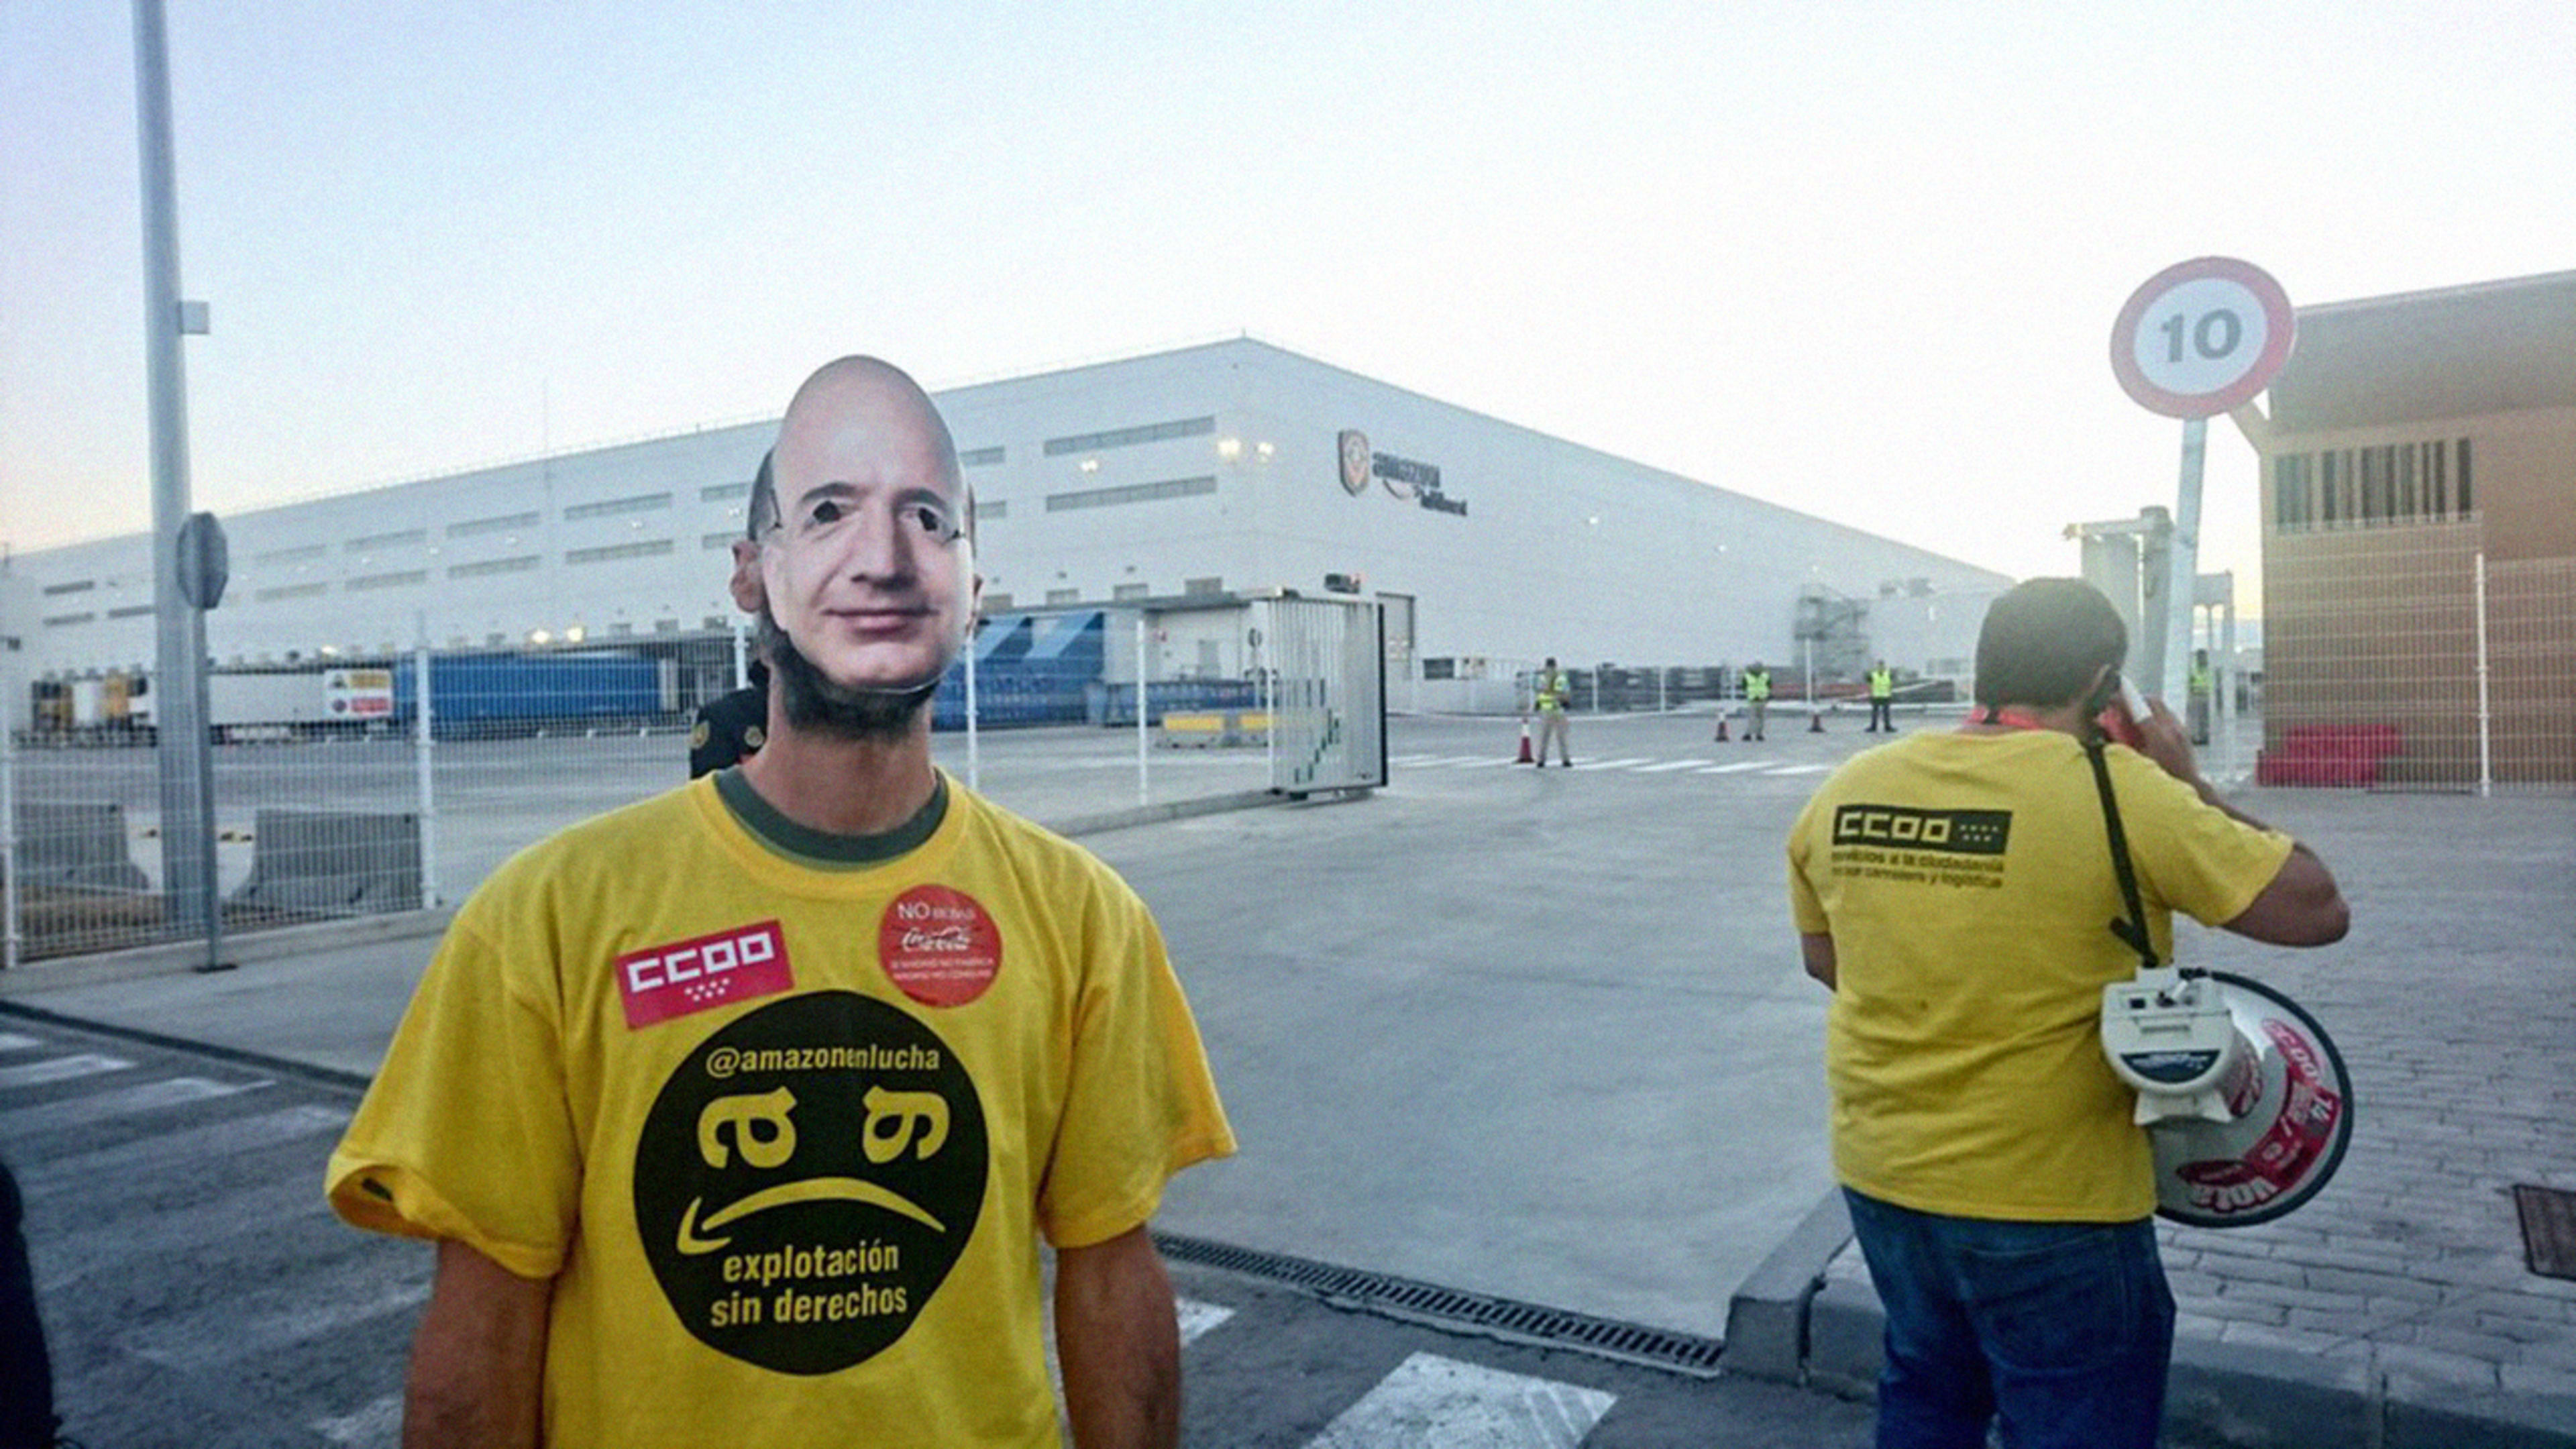 Amazon’s European workers are striking on Prime Day